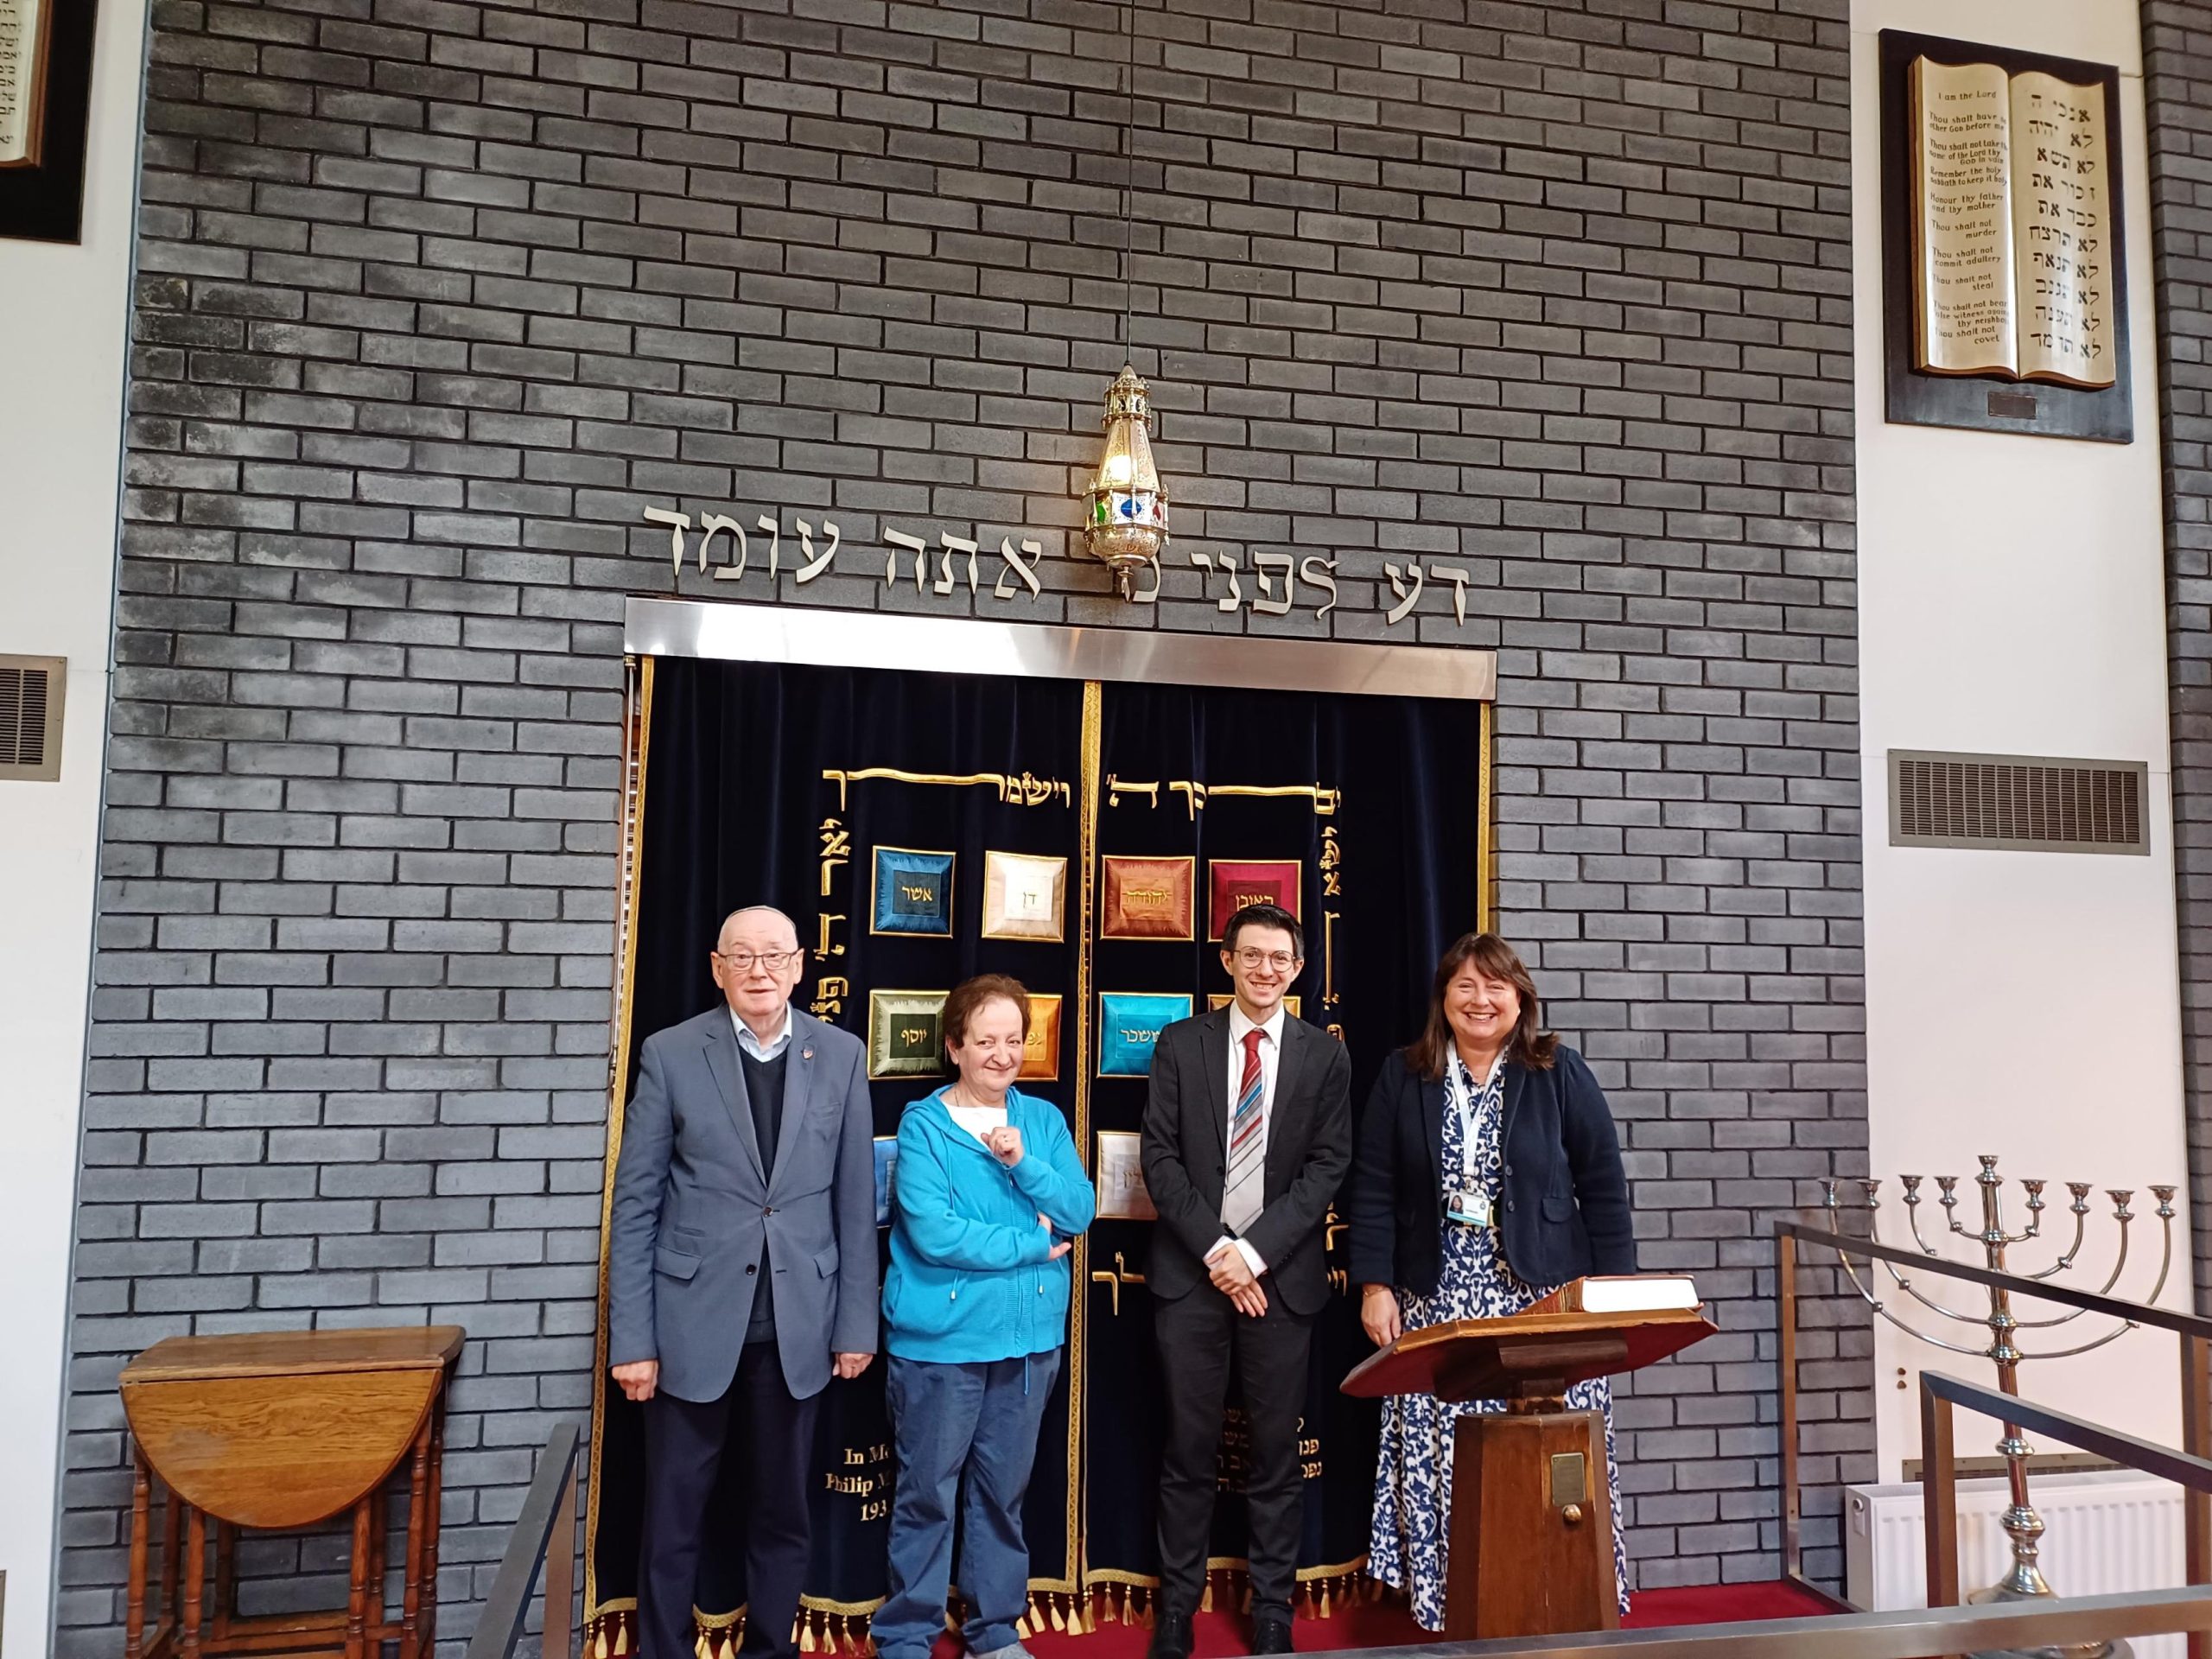 Left to Right - Bernard and Roma, Co-Presidents, Harrogate Hebrew Congregation, Leo, Yorkshire Manager, Jewish Leadership Council and Commissioner Zoe